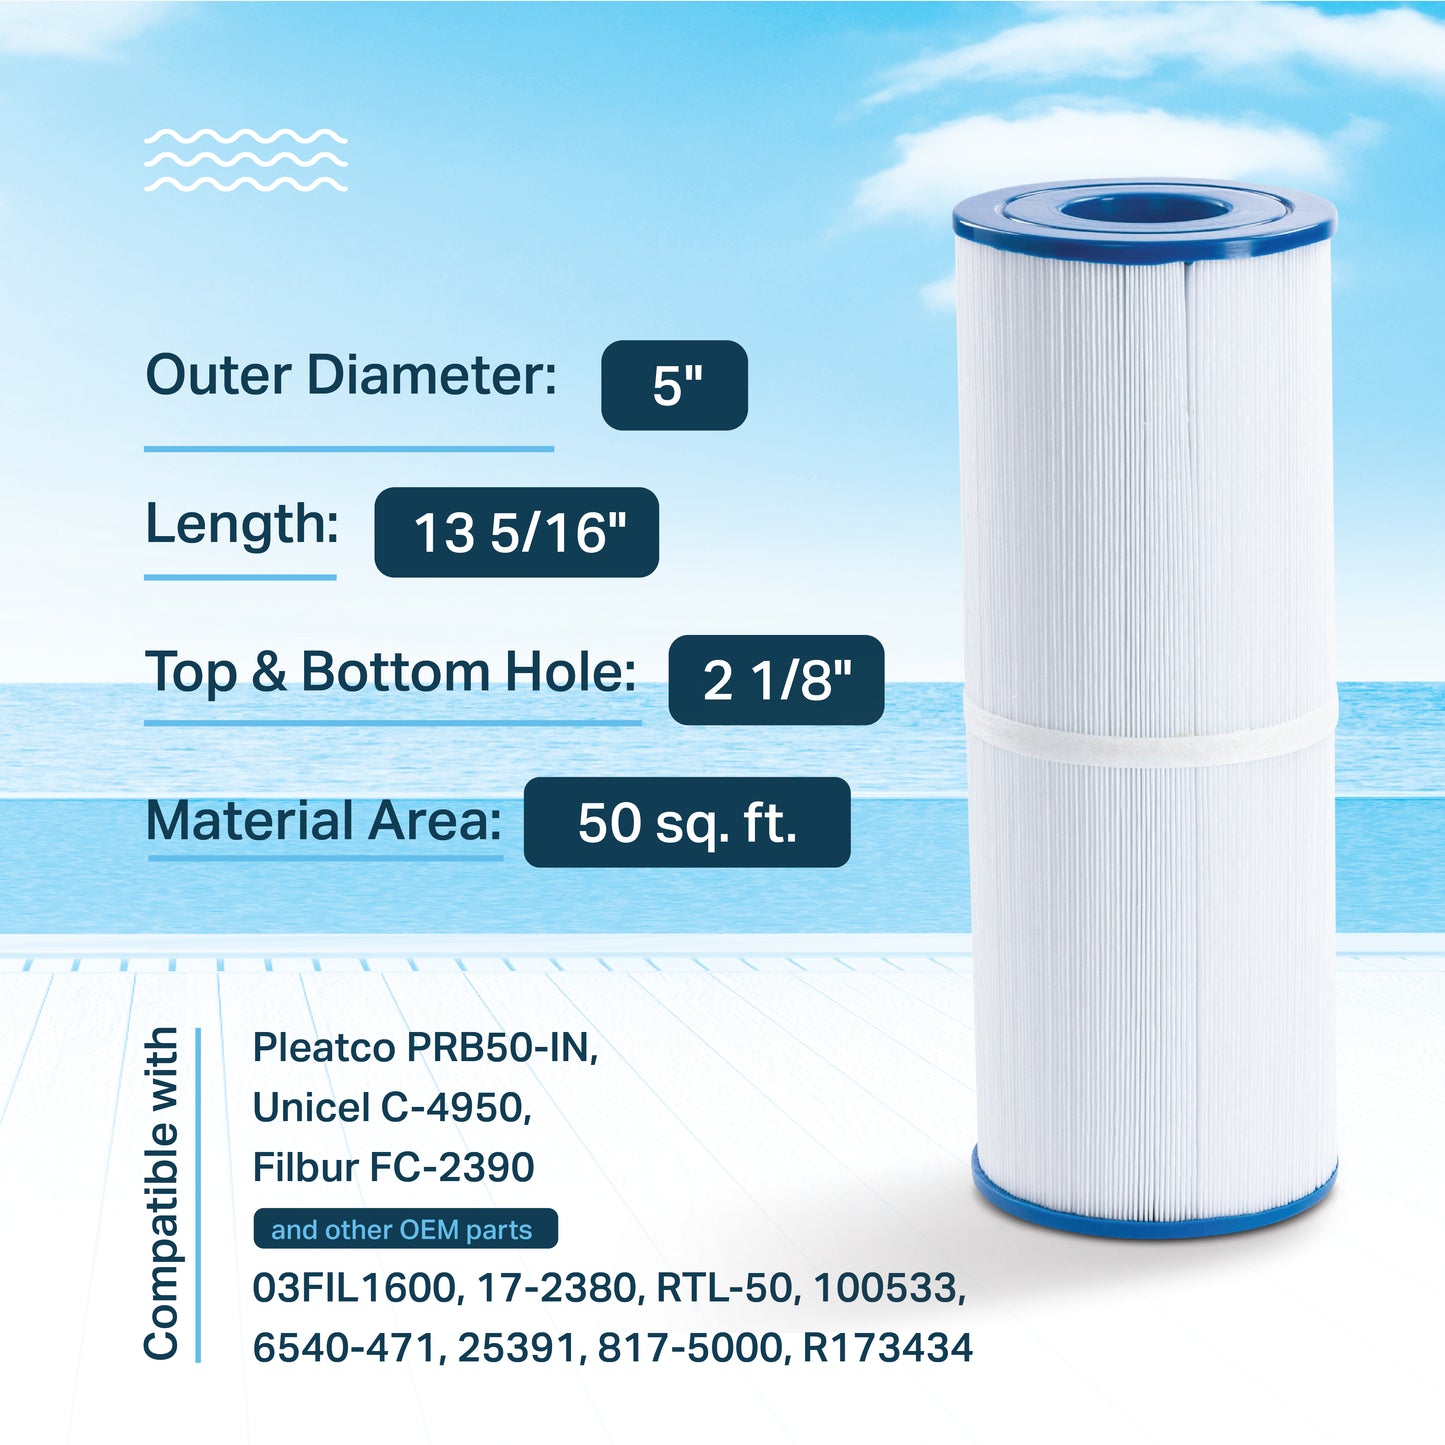 Mist Replacement Pool Filter for Pleatco PRB50-IN, Unicel C-4950, Filbur FC-2390